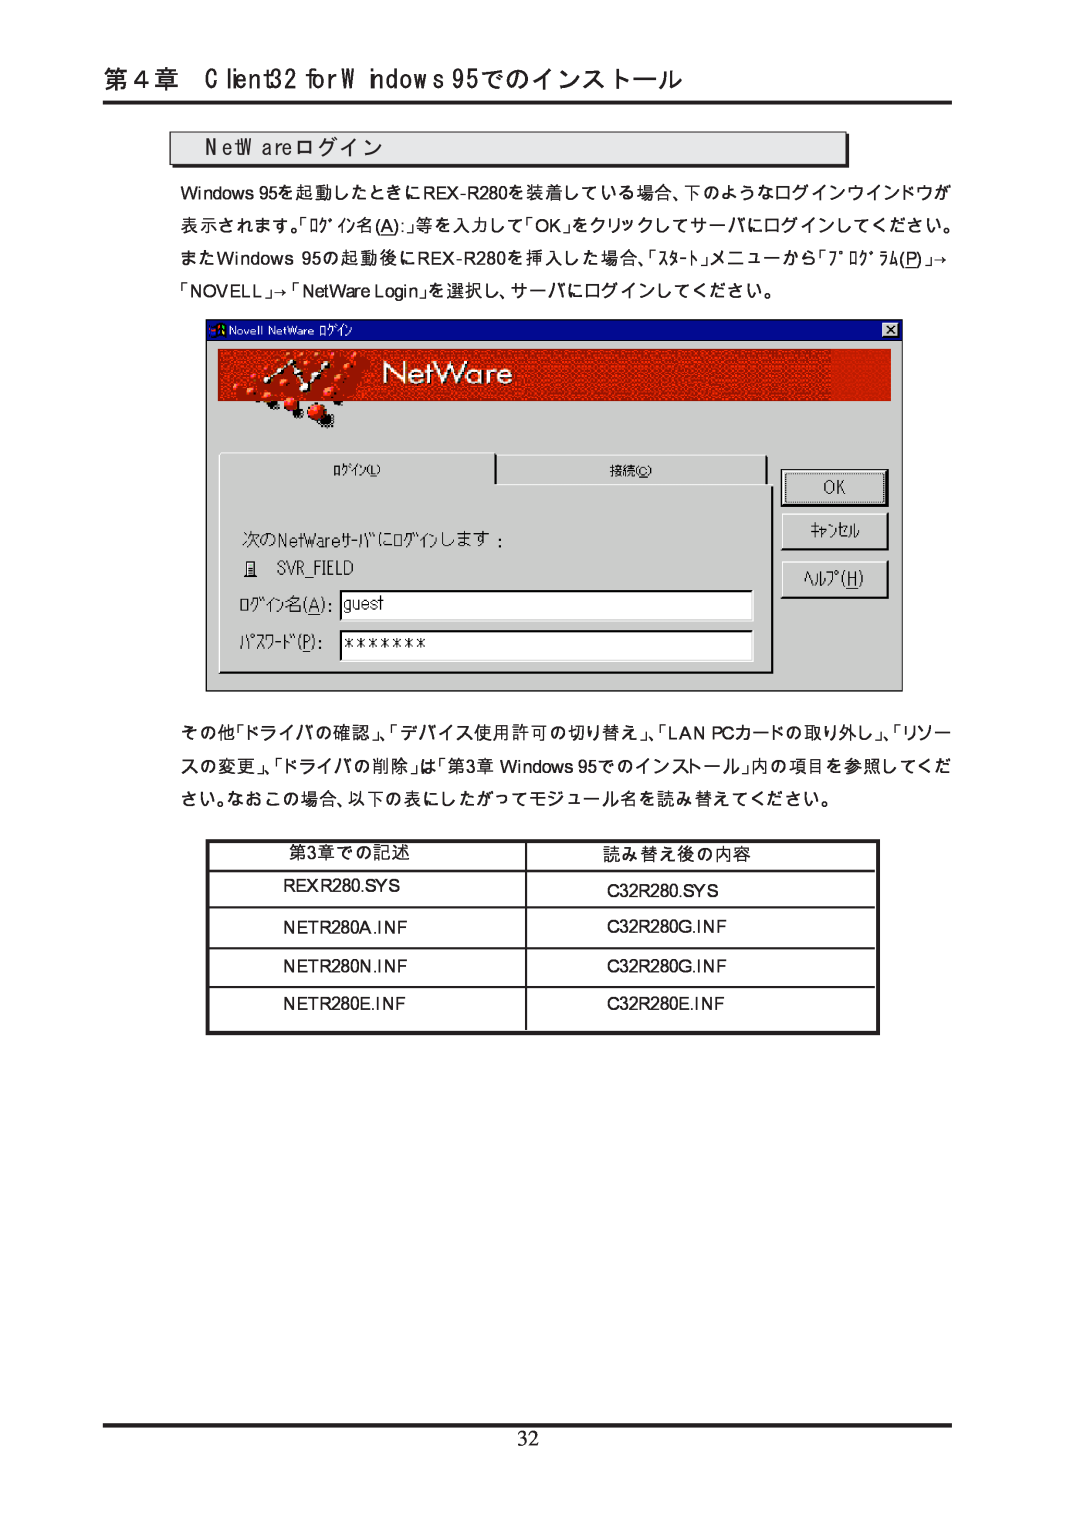 Ratoc Systems REX-R280 manual 第４章 Client32 for Windows 95でのインストール, NetWareログイン 